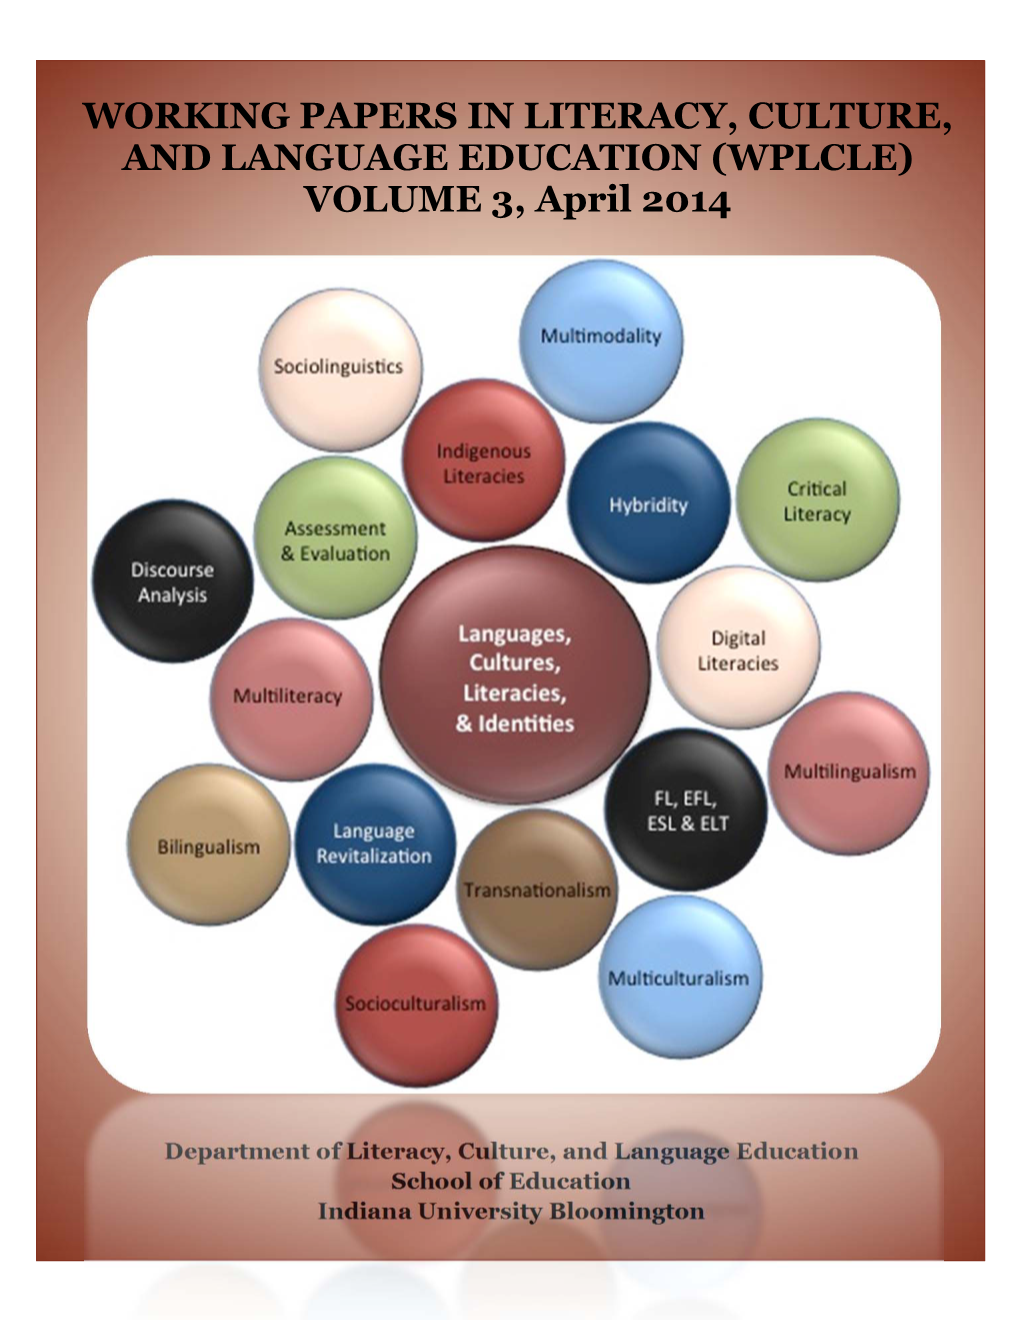 WORKING PAPERS in LITERACY, CULTURE, and LANGUAGE EDUCATION (WPLCLE) VOLUME 3, April 2014